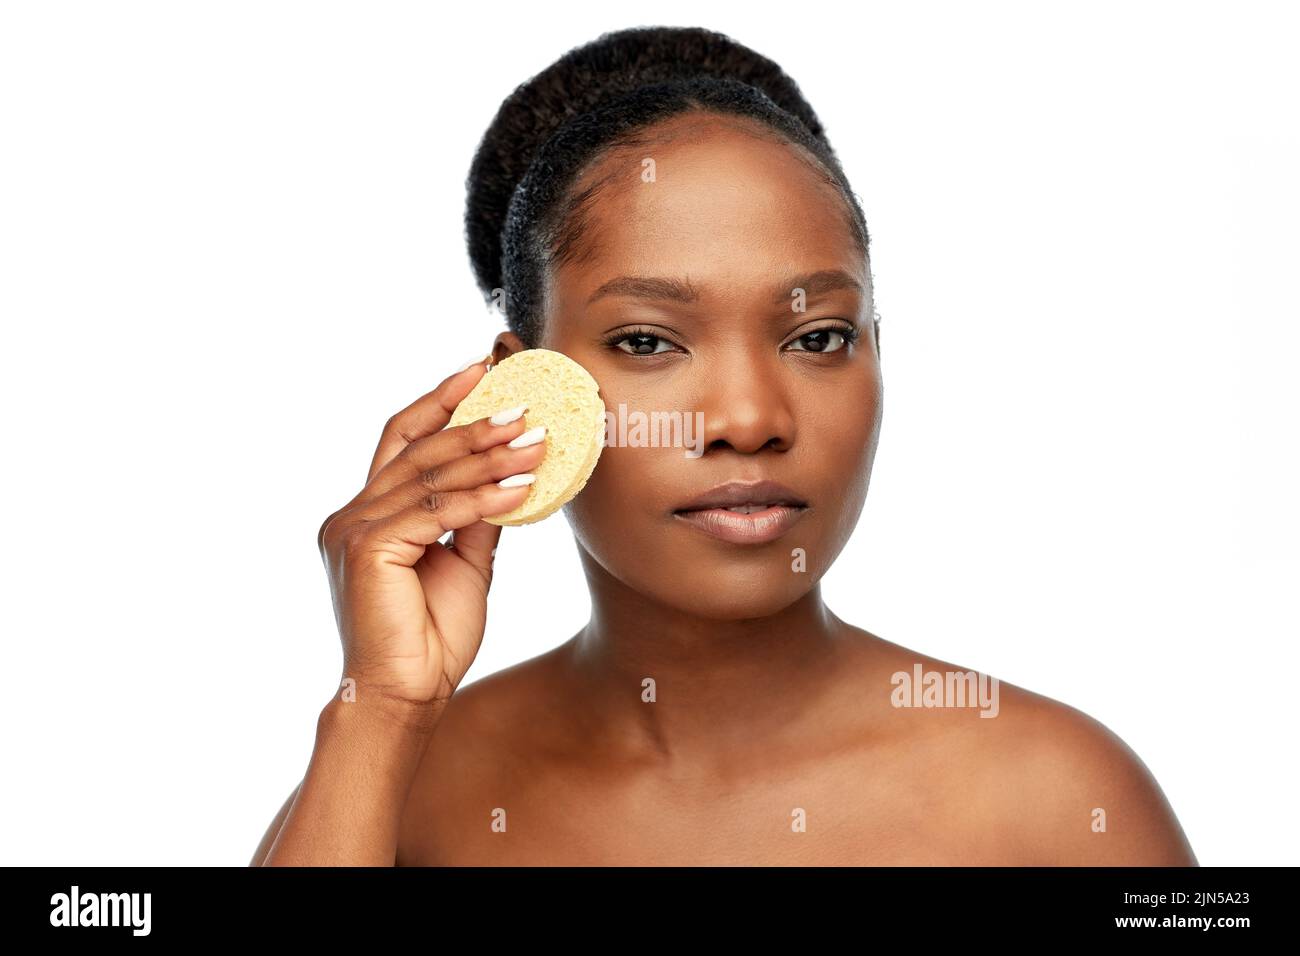 young woman cleaning face with exfoliating sponge Stock Photo